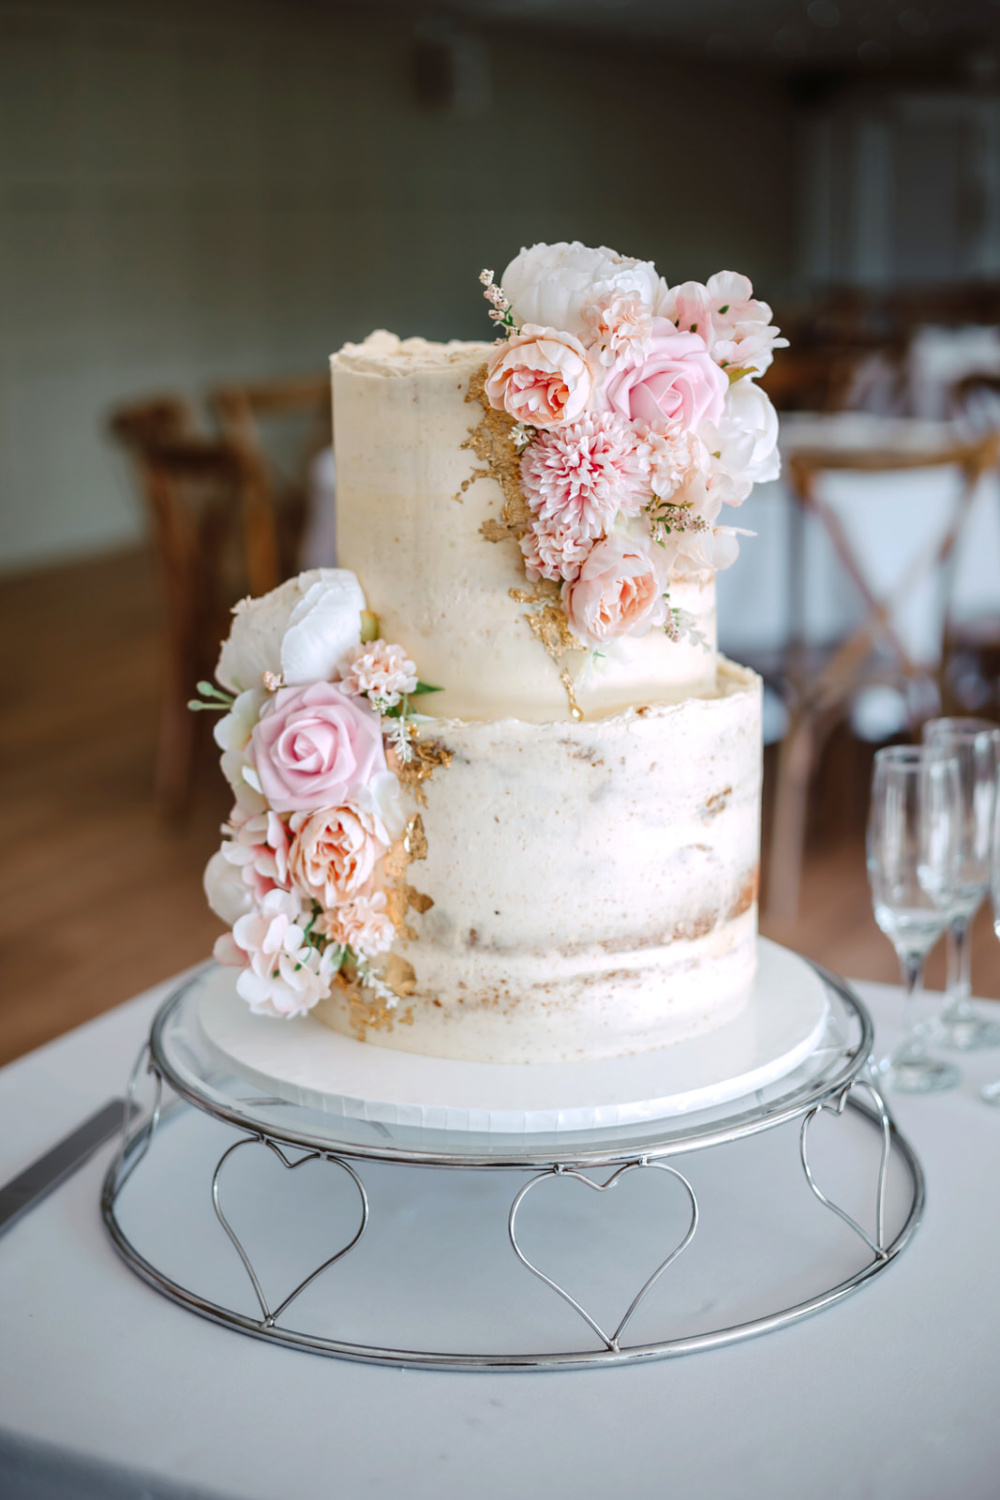 A three tier wedding cake with pink and white flowers.